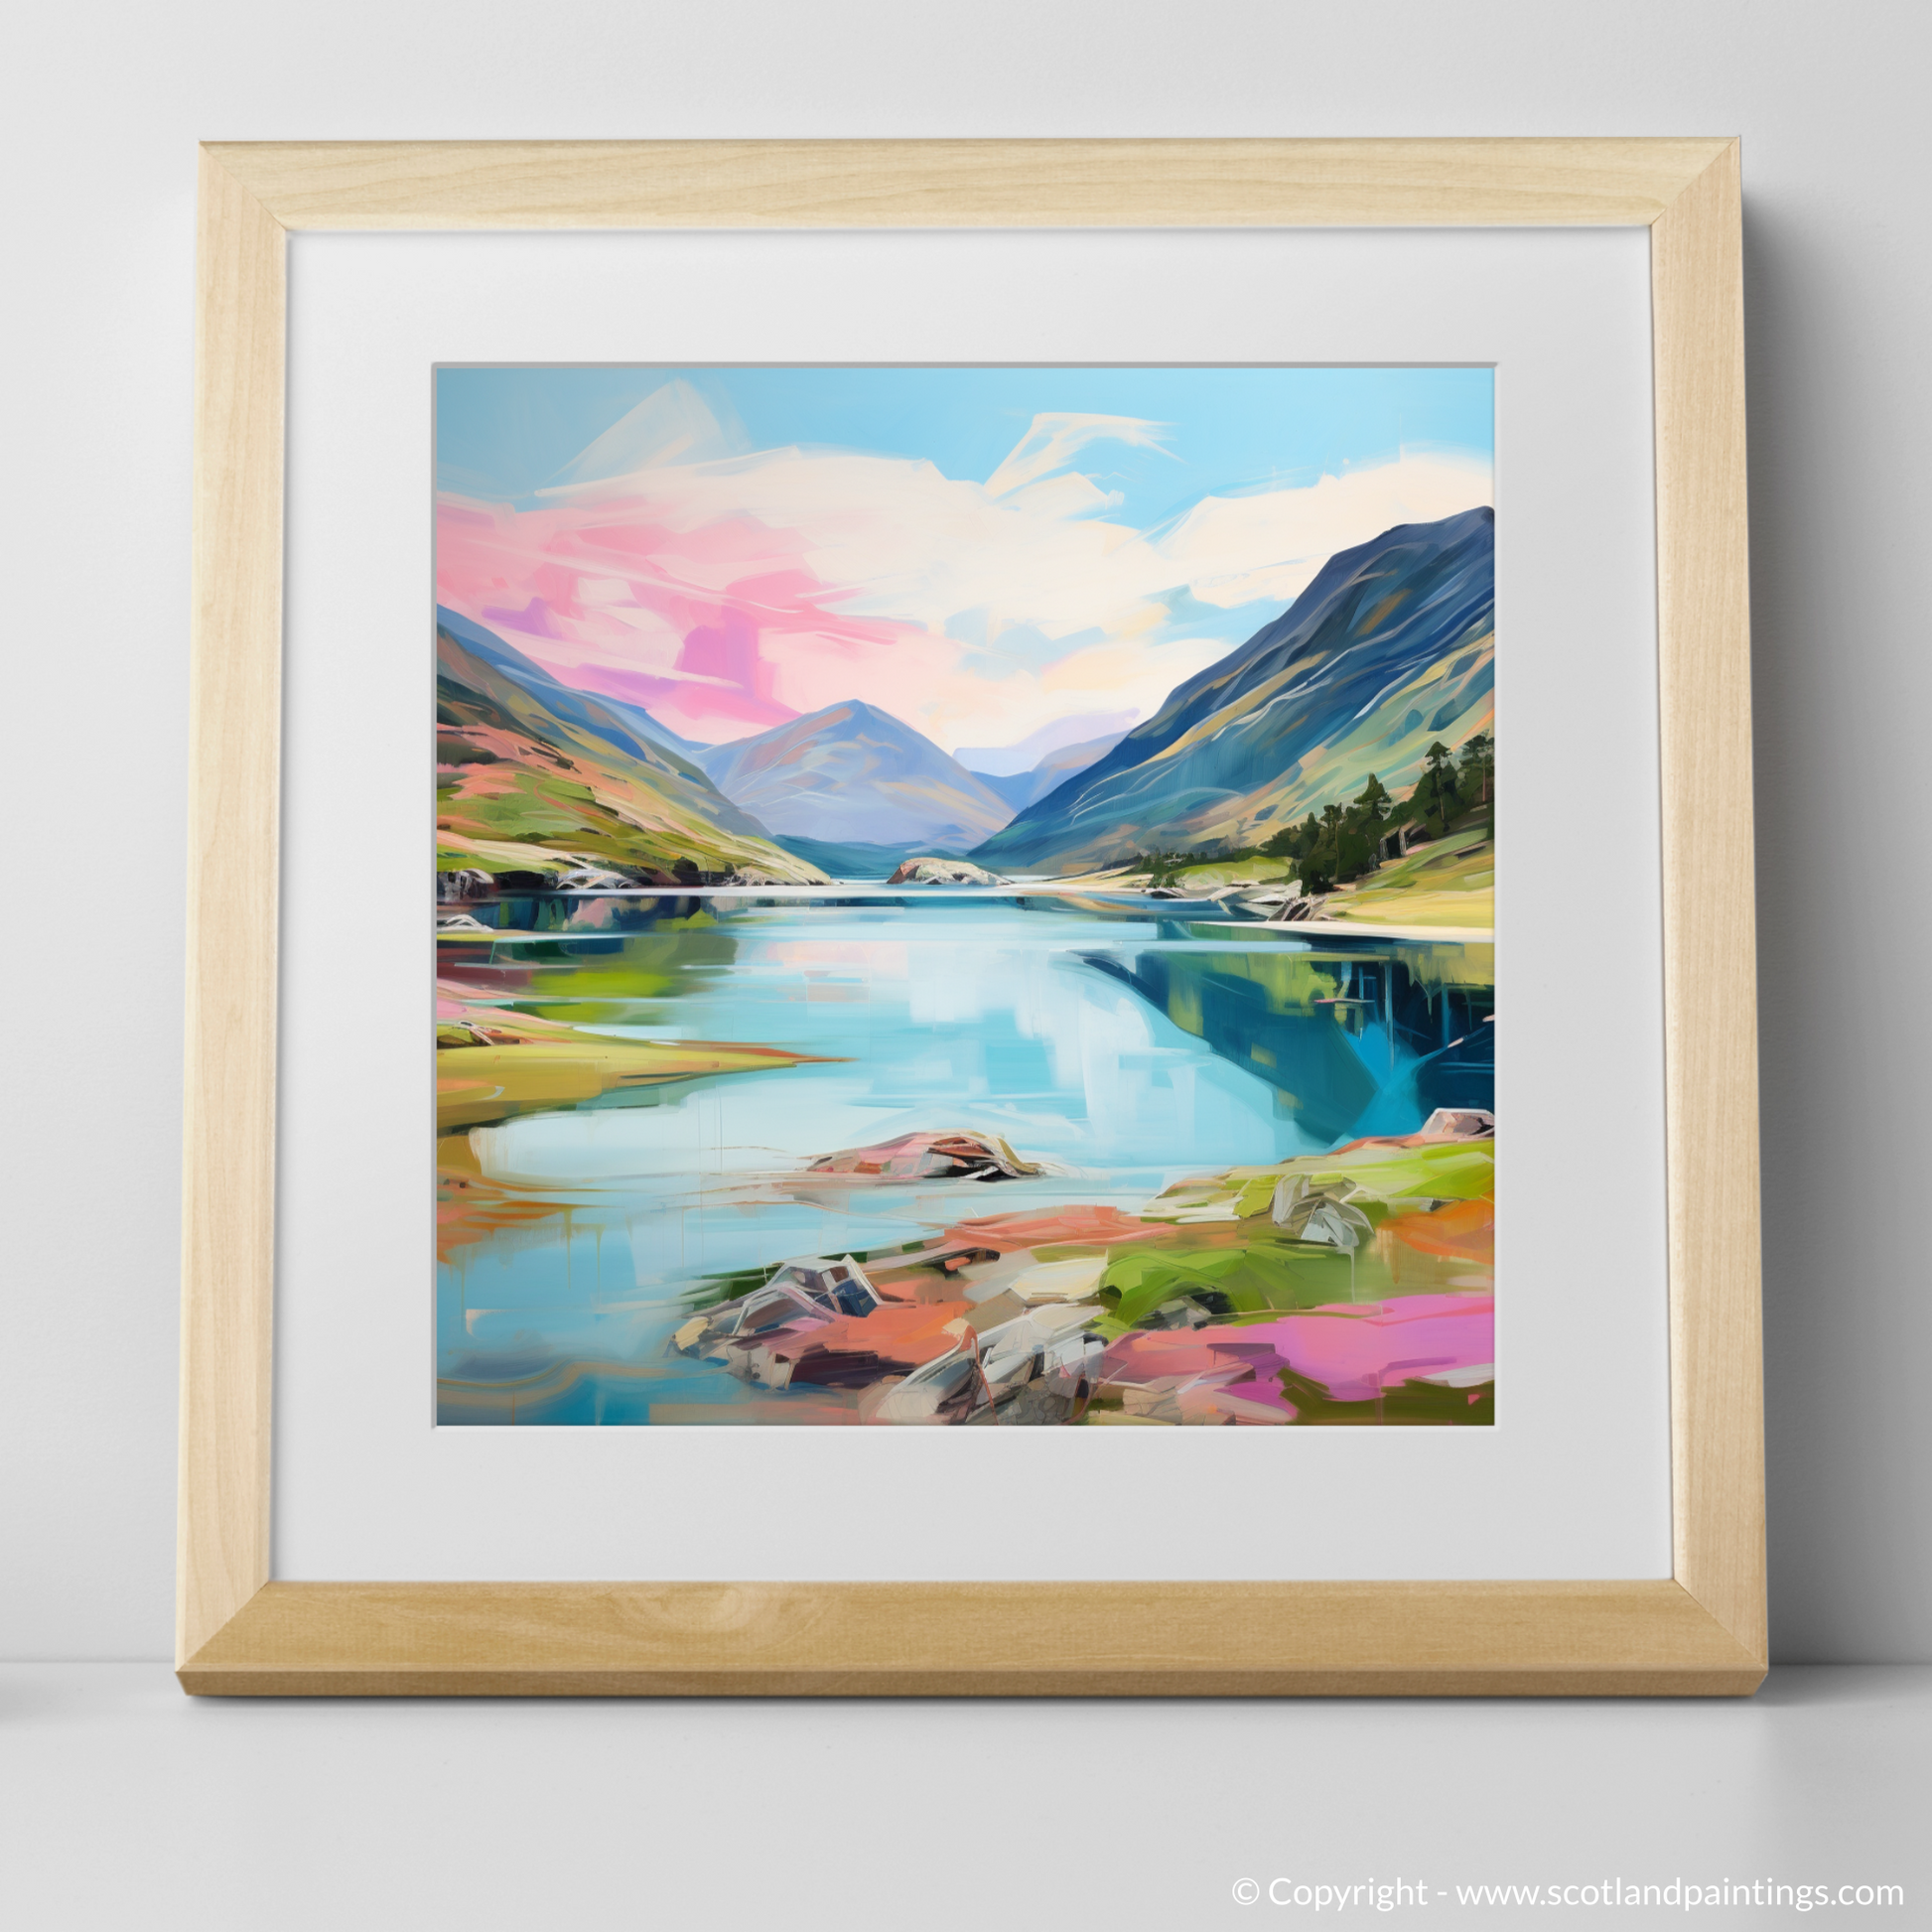 Art Print of Loch Shiel, Highlands in summer with a natural frame